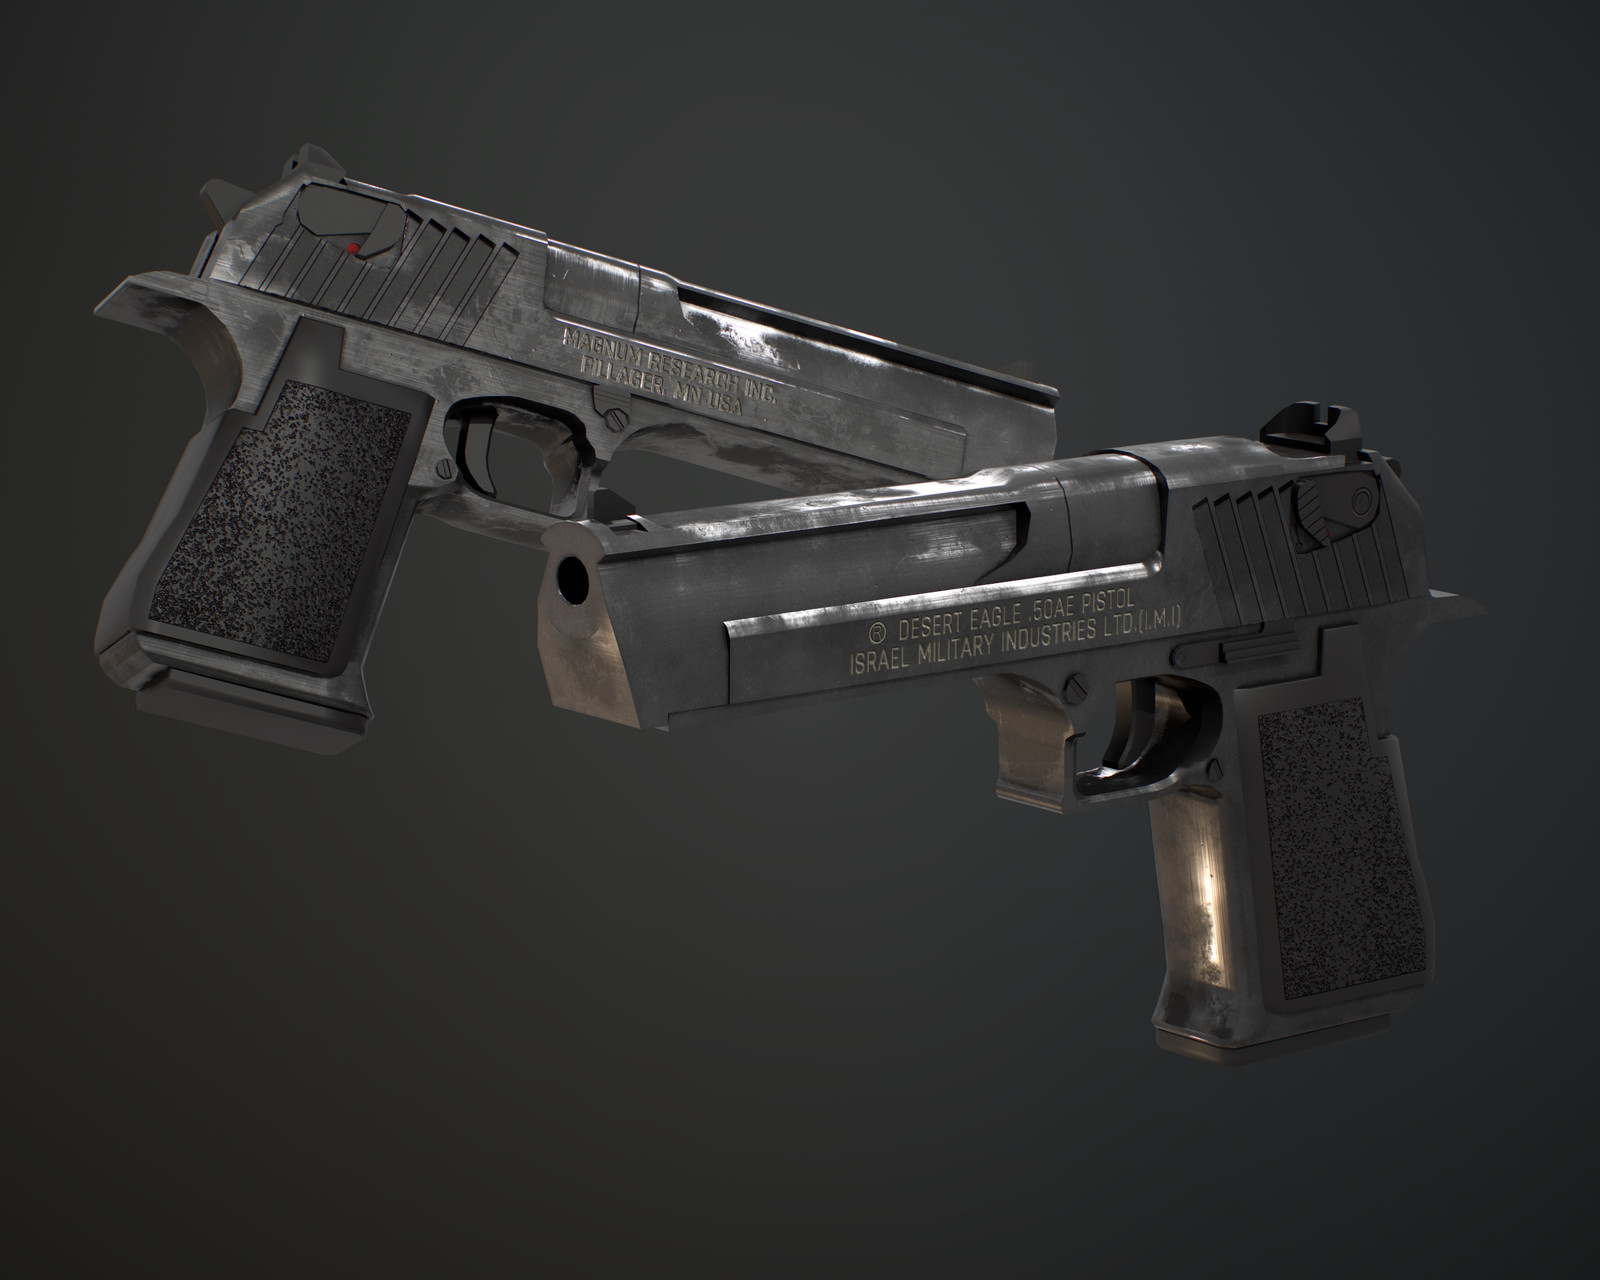 Added a quick retexture of the gun, tweaked some of the metalness to get a darker look.